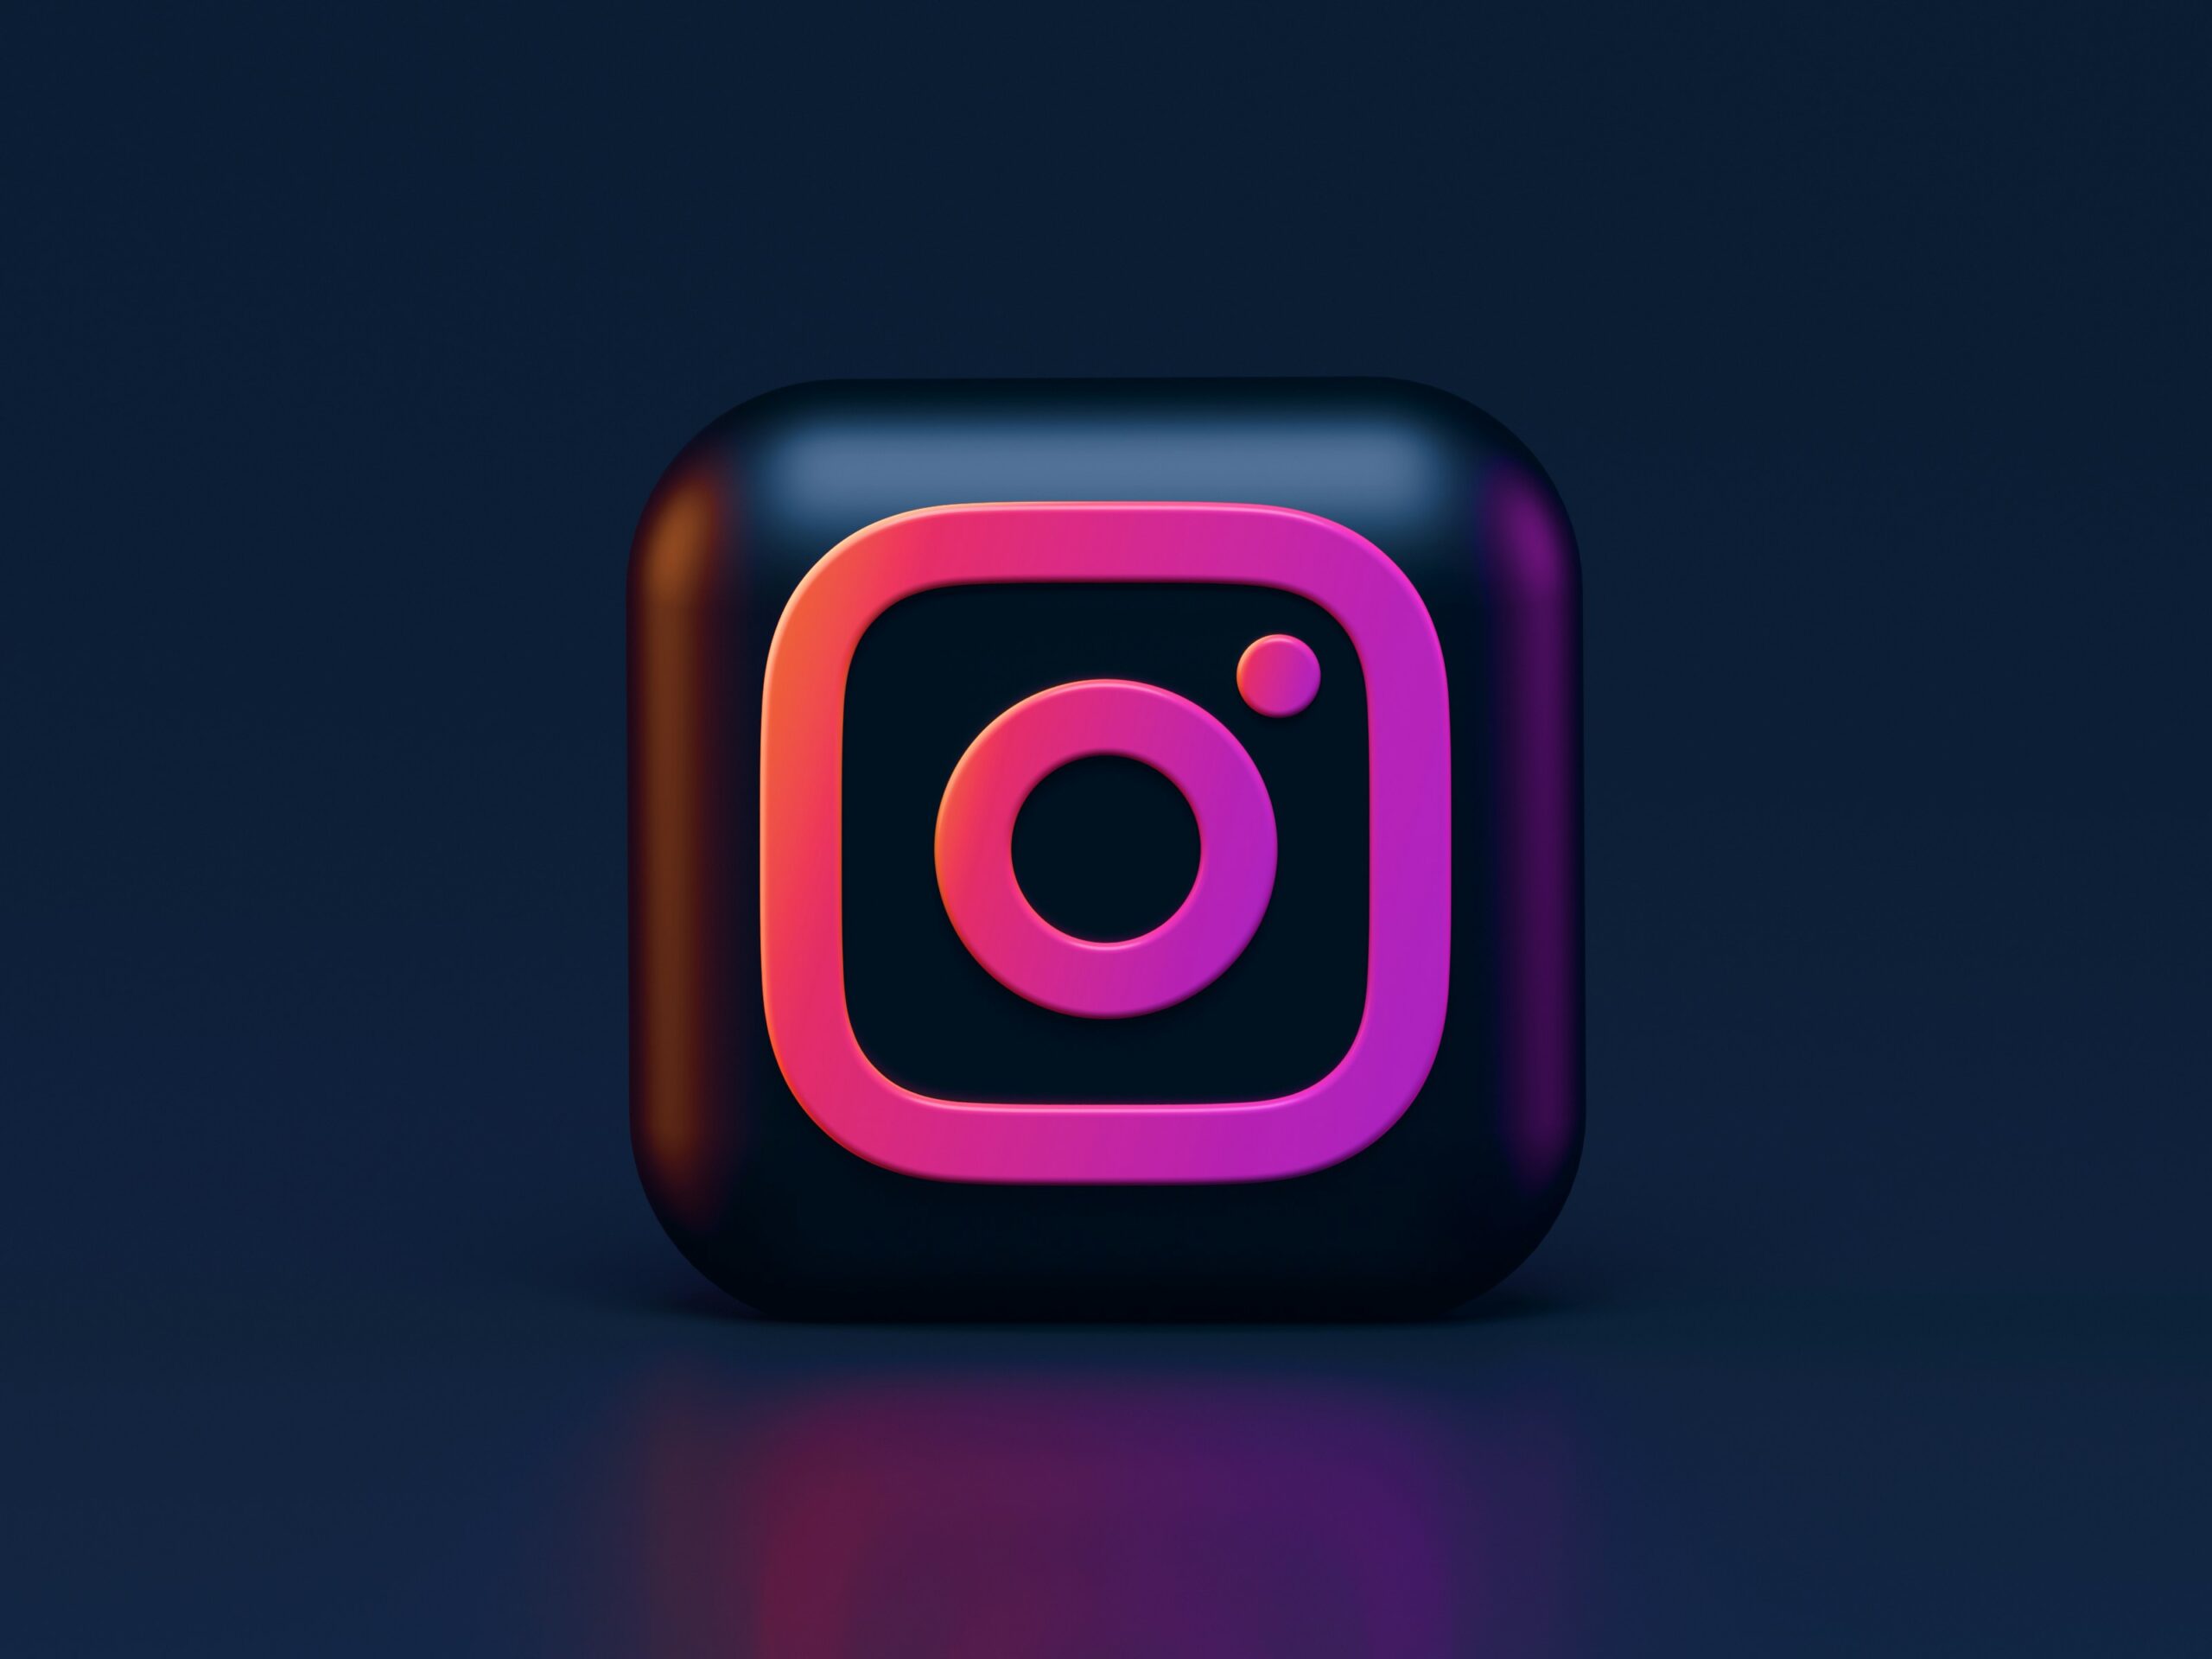 3d rendering of the instagram app icon glowing in pink and purple hues on a dark background depicting instagram's shopping feature for affiliate marketing